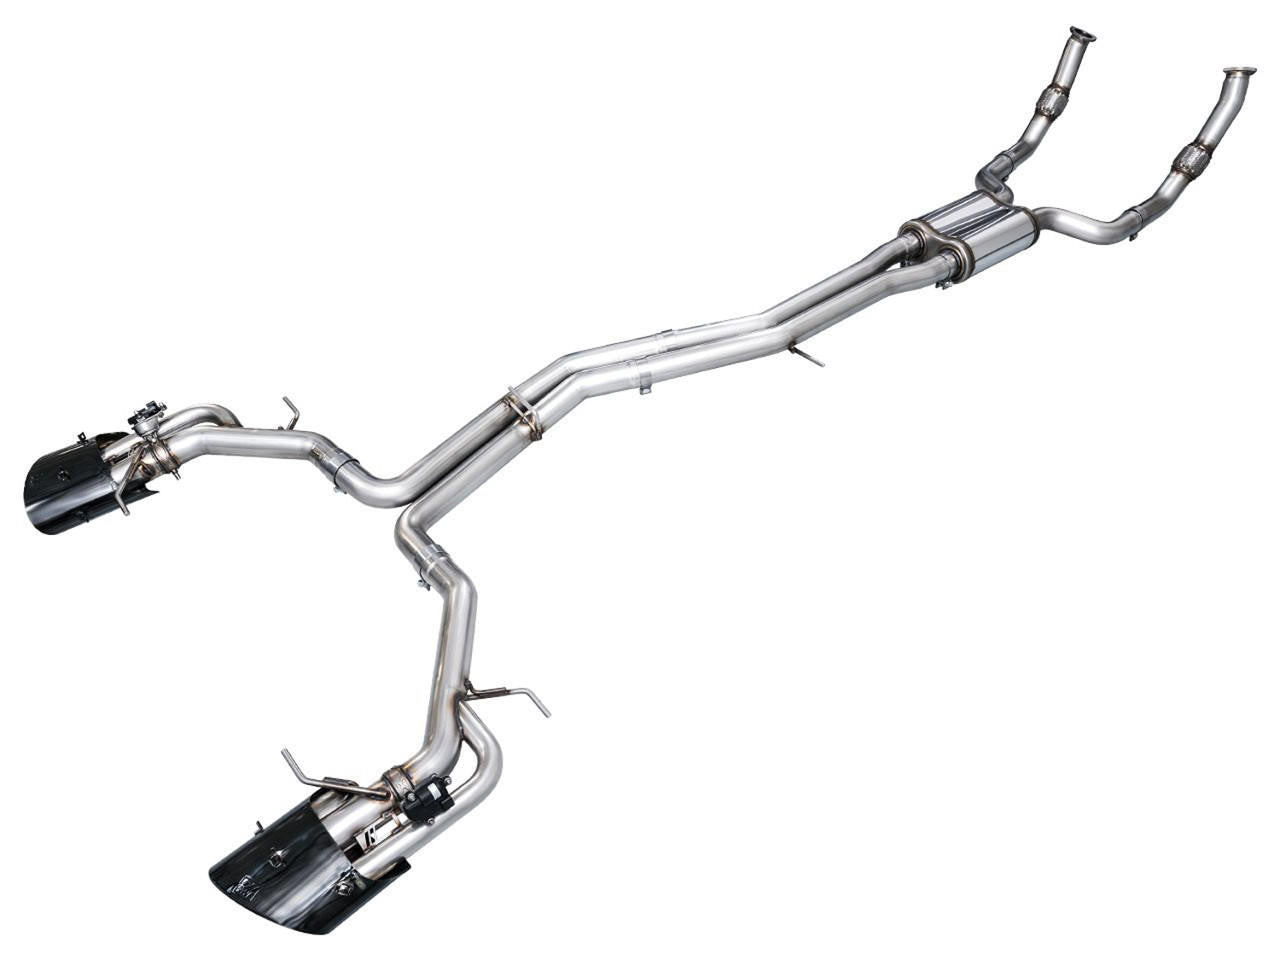 AWE Tuning AWE SwitchPath Exhaust for C8 Audi RS 6/RS 7 - Diamond Black RS-style Tips 3025-33776 